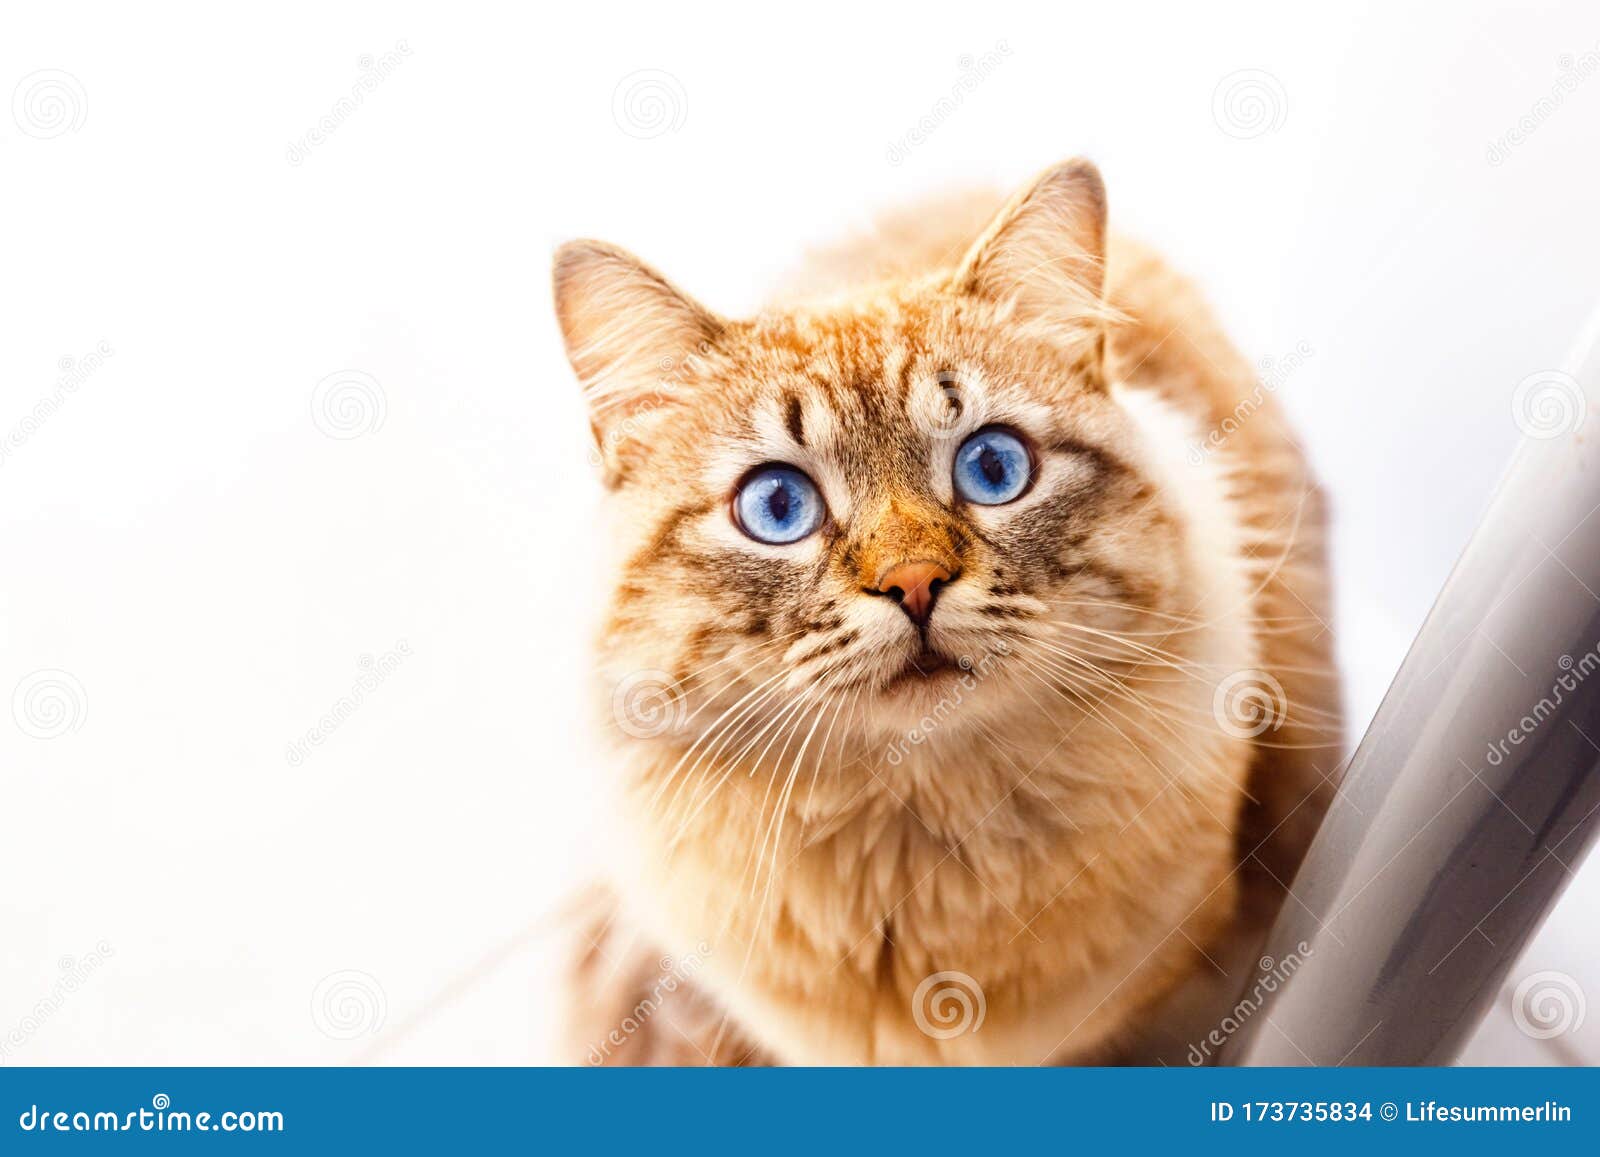 Portrait Of An Orange Cat With Light Blue Eyes Stock Photo Image Of Background Kitten